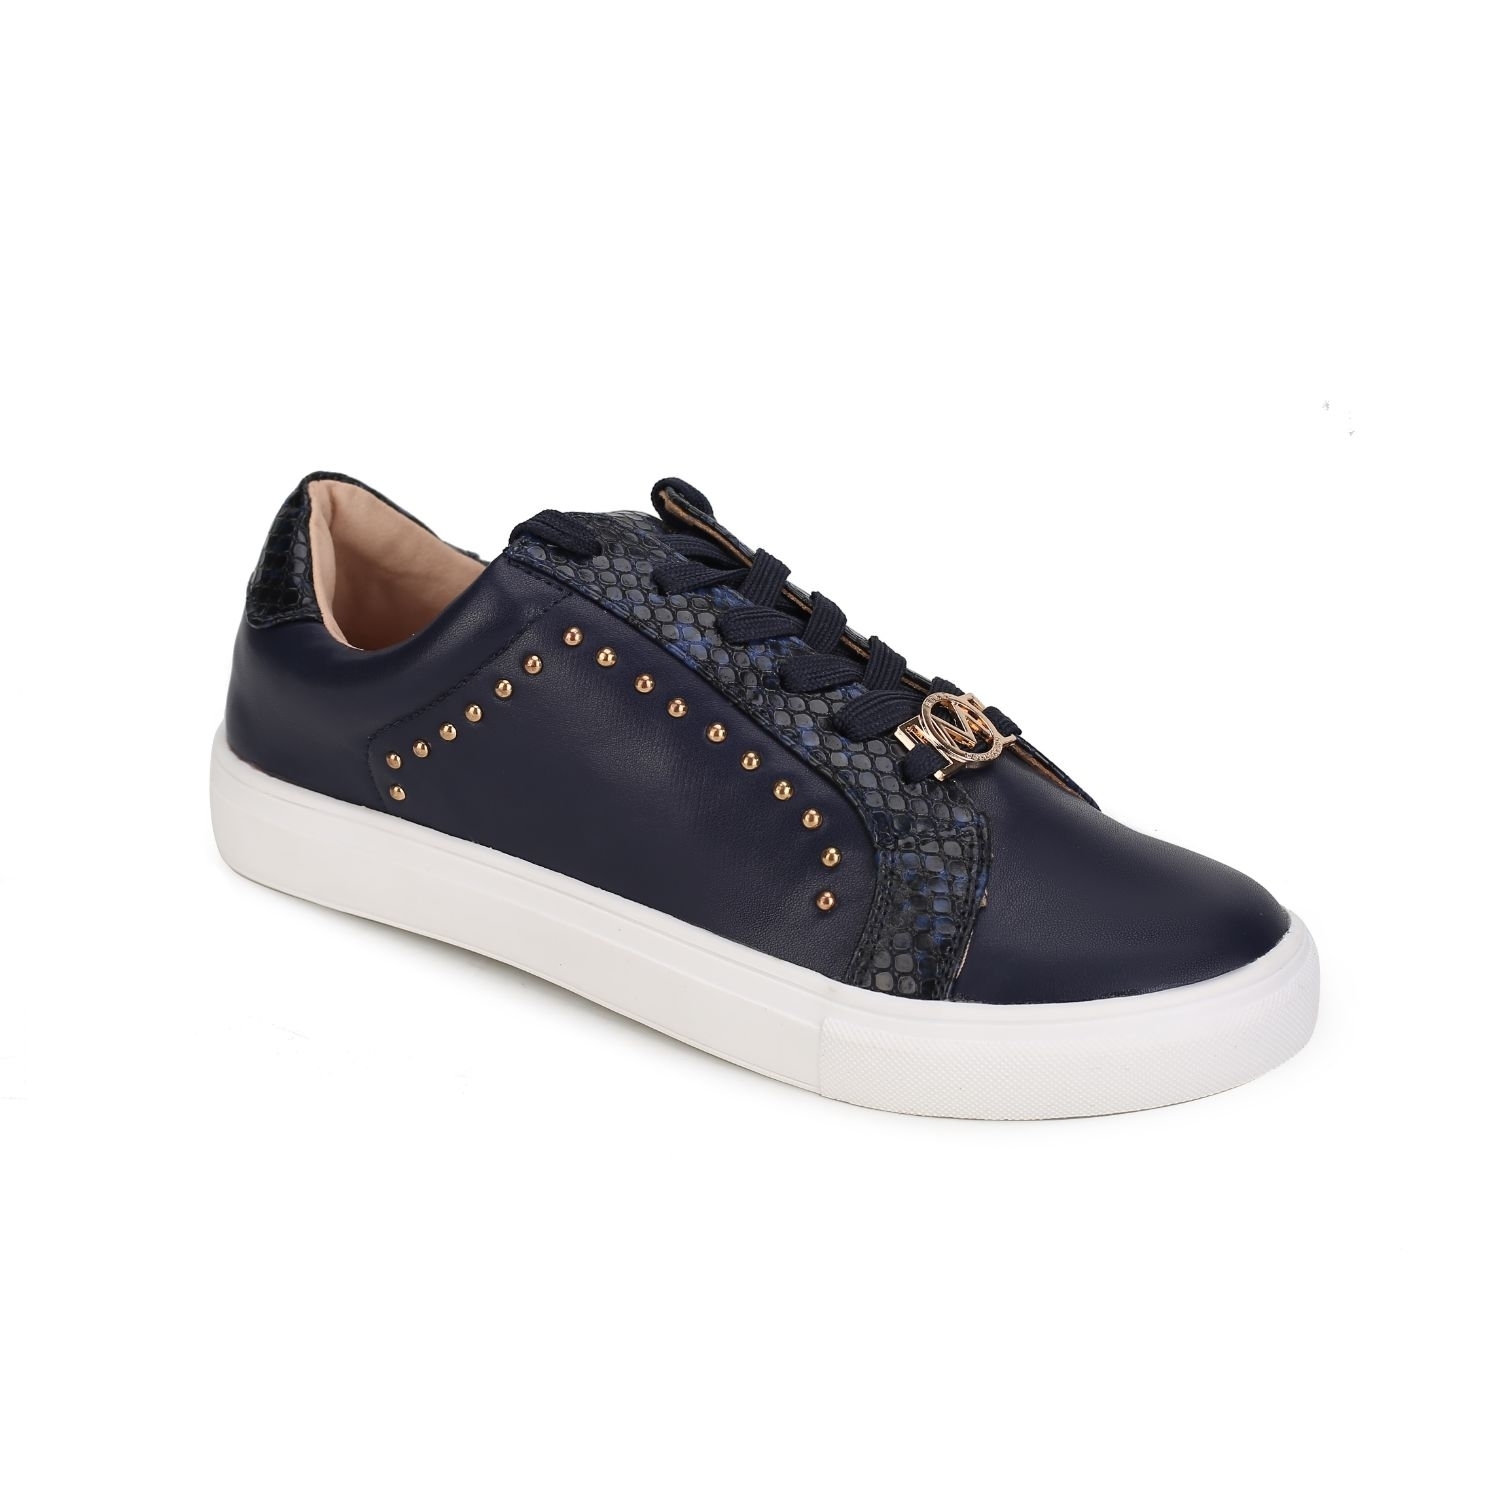 MKF Collection Tamara Snake Tennis Shoes For Women With Adjustable Laces By Mia K - Navy-7.5